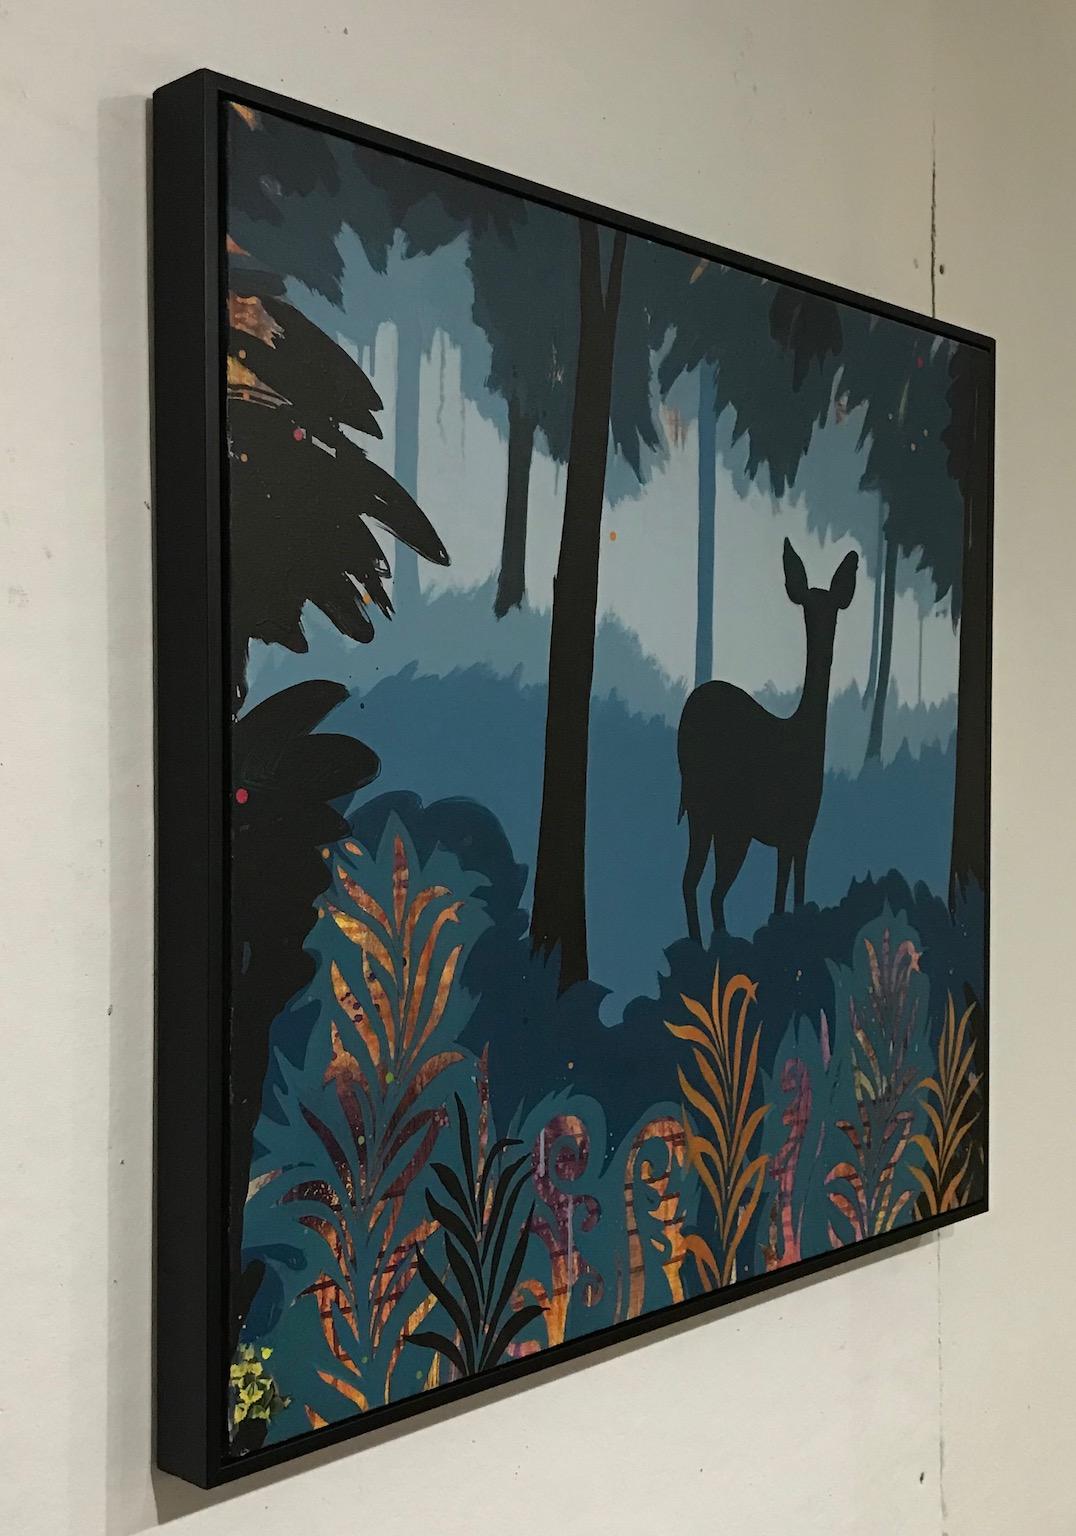 Anne Sargent Walker’s “Blue Deer” is a 32 x 36 inch acrylic painting framed in satin finish black wood. A softly silhouetted doe painted in a range of blues stands amid foliage, ferns and trees, with accents of purple, orange and gold. Gaps in the